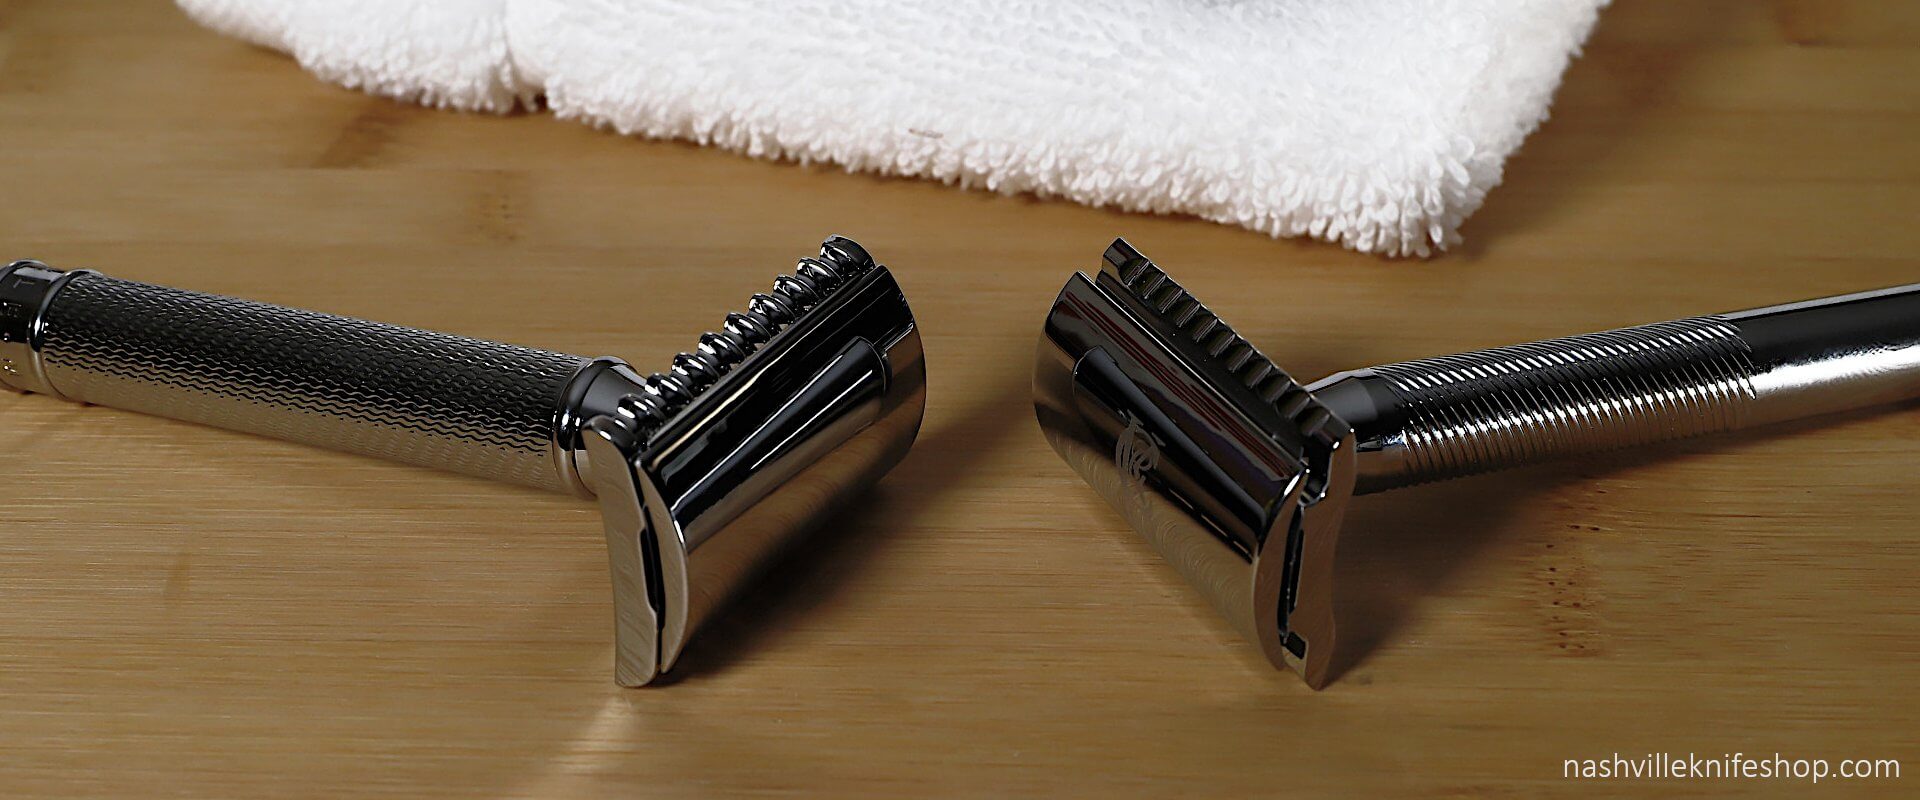 razor plane with open and closed comb Facing